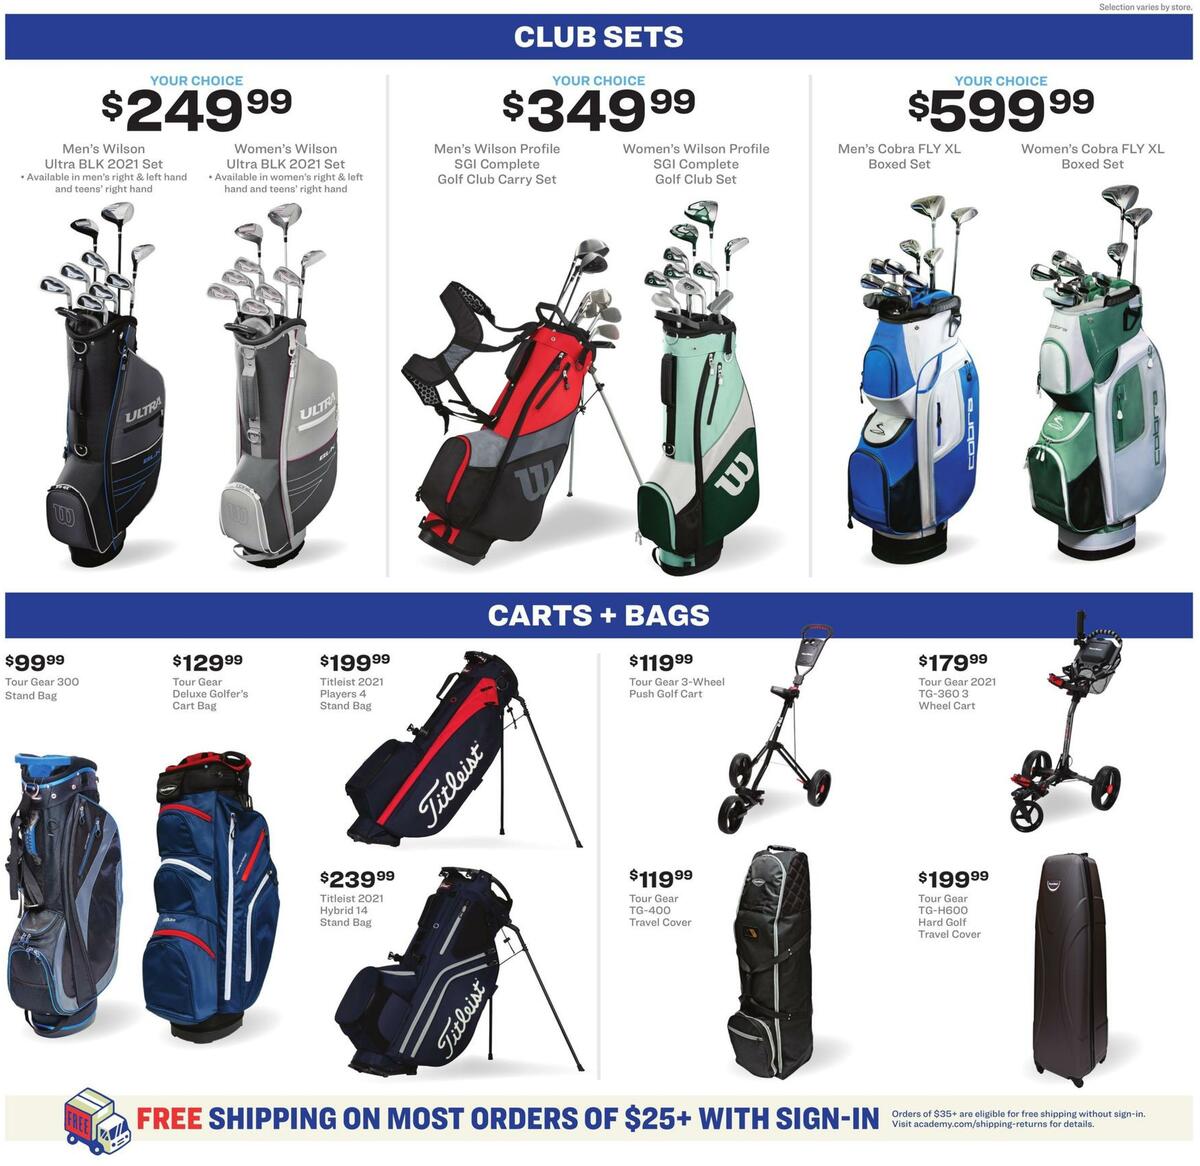 Academy Sports + Outdoors Weekly Ad from April 19